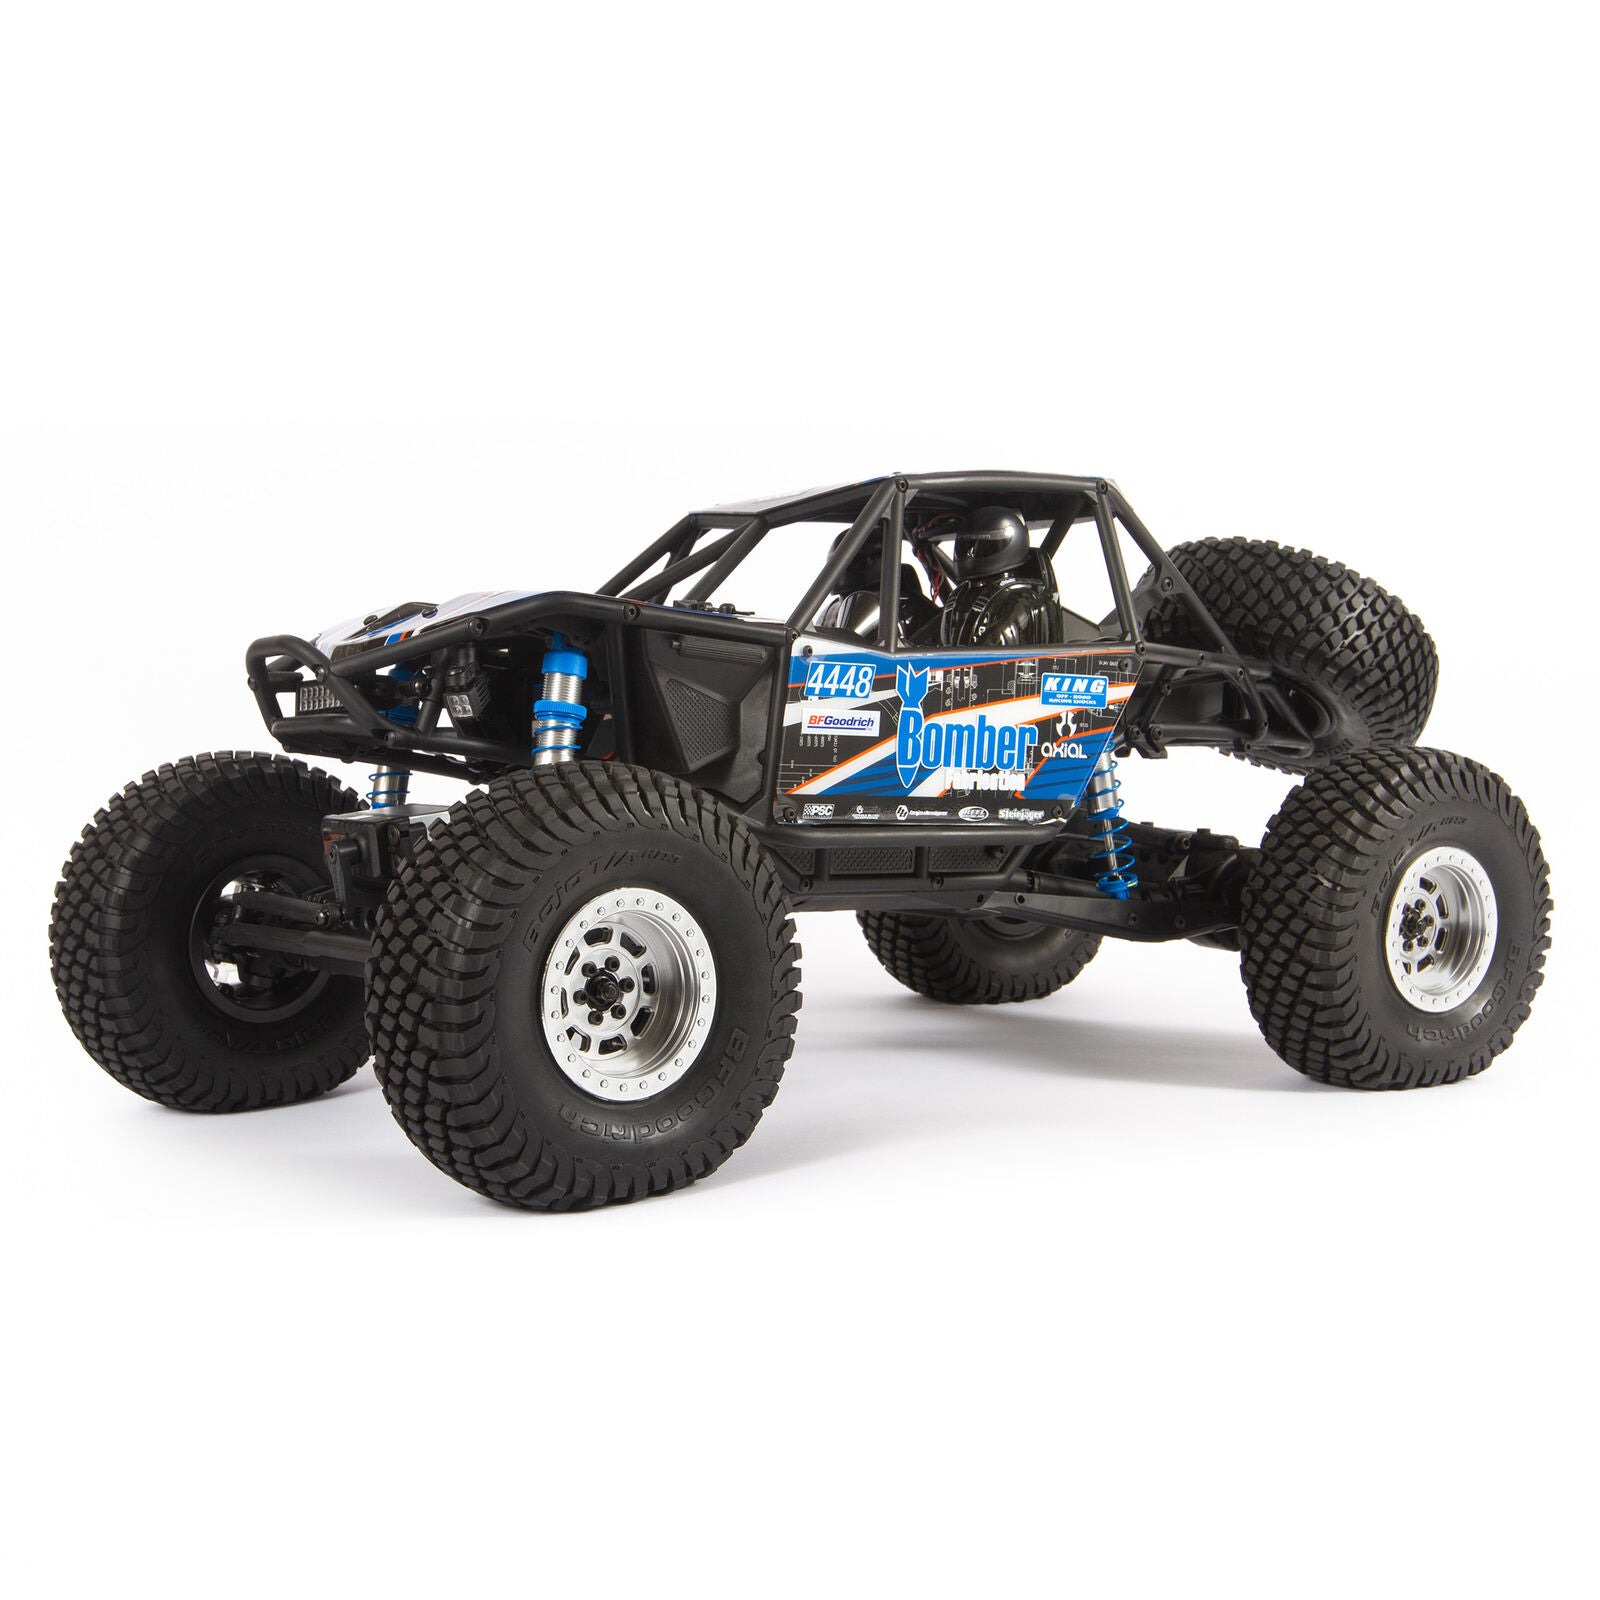 AXIAL AXI03016 1/10 RR10 Bomber 4WD Rock Racer RTR